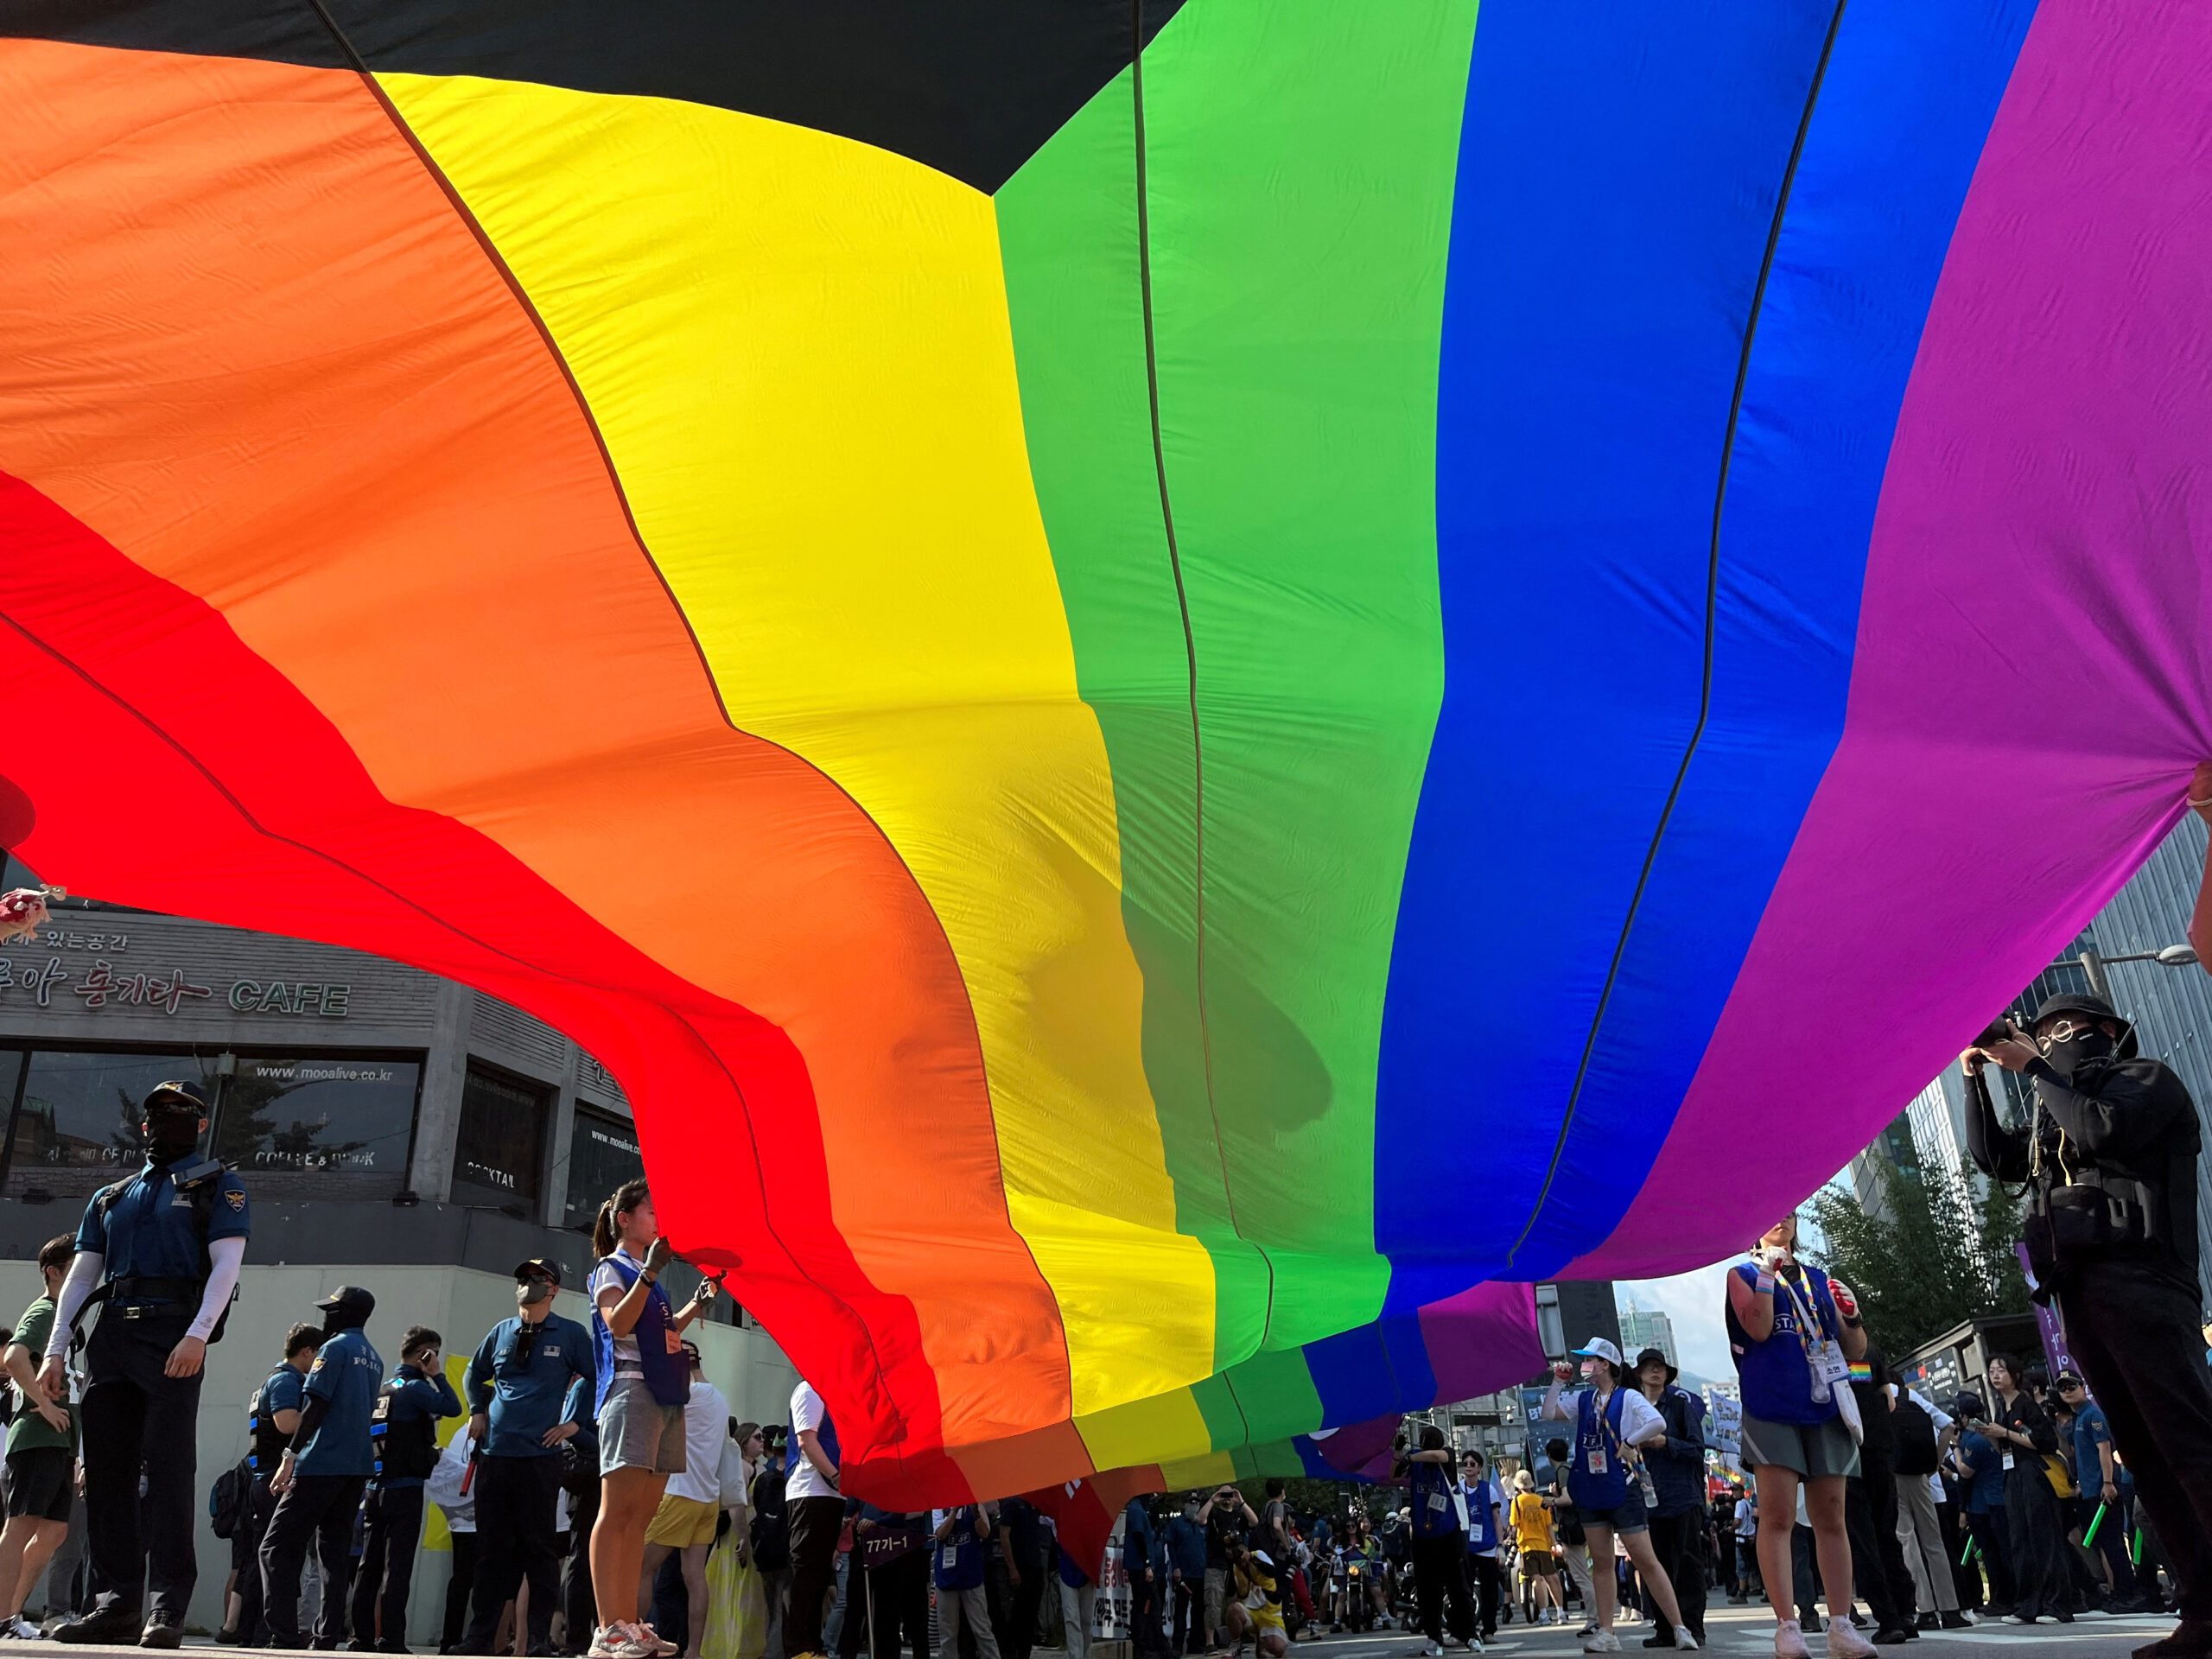 South Korea Lgbt Festival Proceeds Bumped From Prime Spot By Christian Group Flipboard